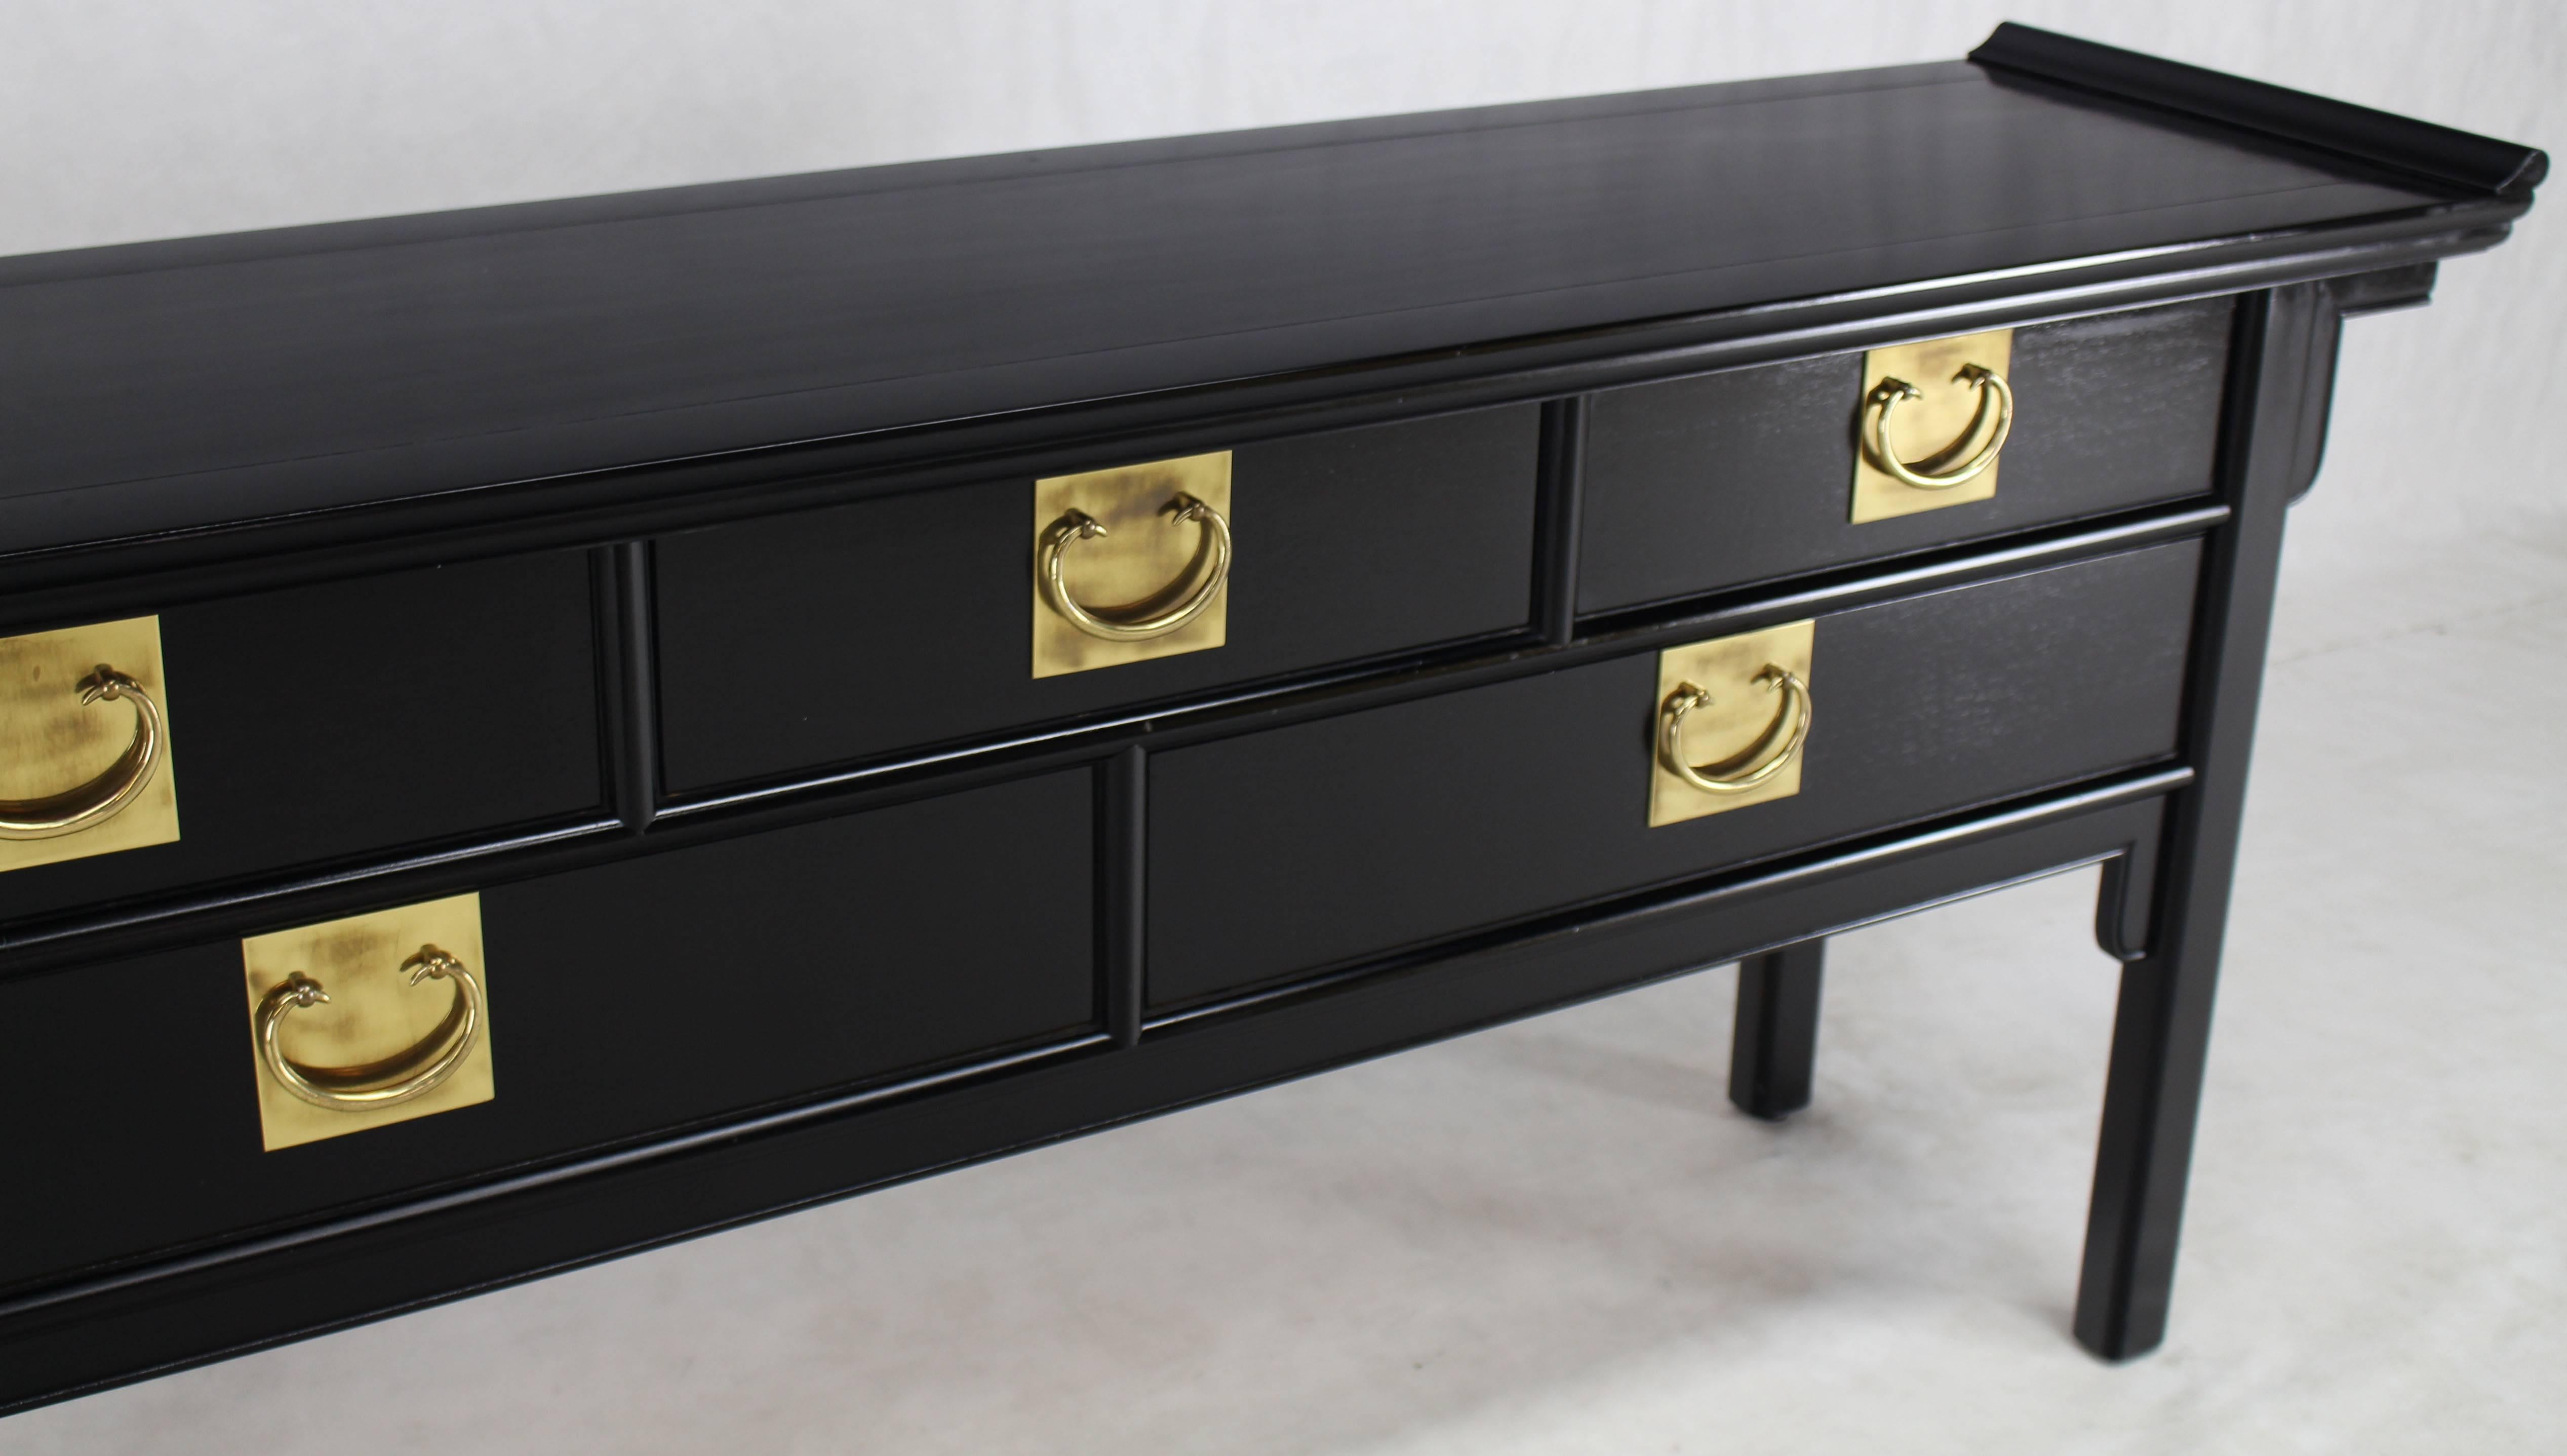 Very nice solid brass horse shoe style pulls black lacquer five-drawer cabinet server sideboard.